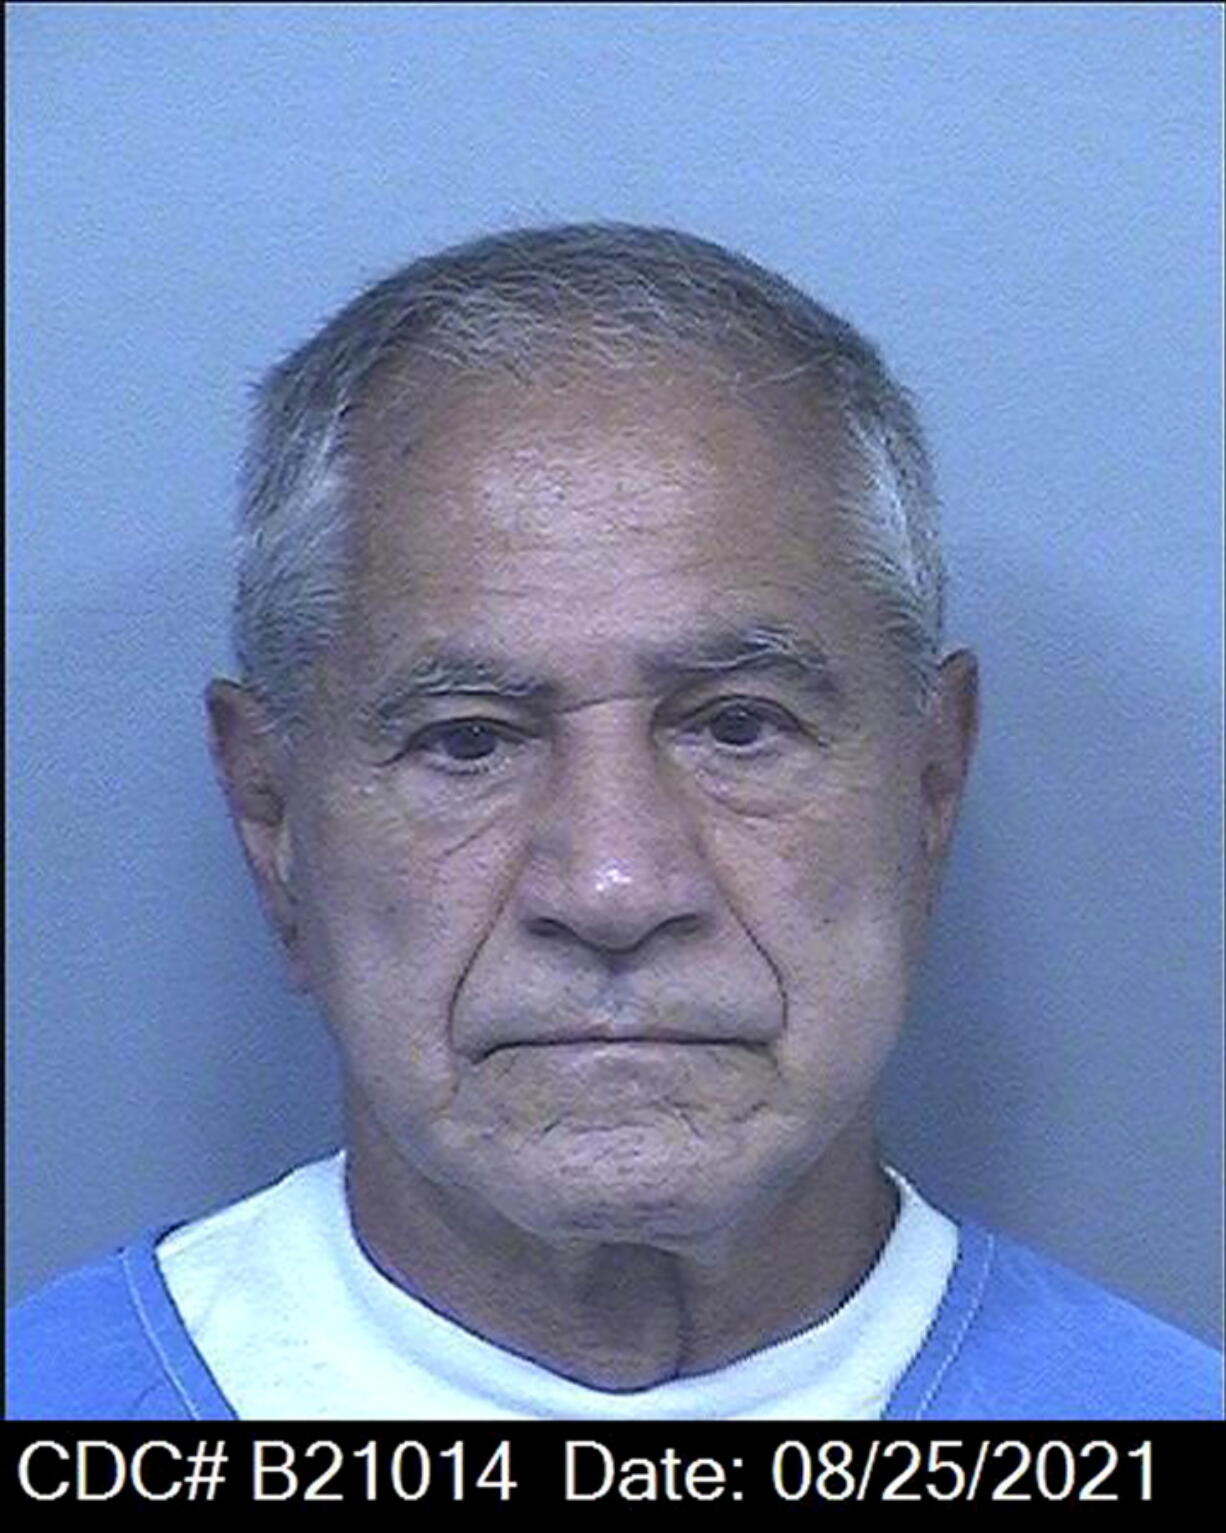 This photo released by the California Department of Corrections and Rehabilitation shows Sirhan Sirhan. Sirhan Sirhan, who assassinated presidential candidate Robert F. Kennedy in 1968, is asking a judge on Wednesday, Sept. 28, 2022, to free him from prison by reversing California Gov. Gavin Newsom's denial of his parole earlier in the year.